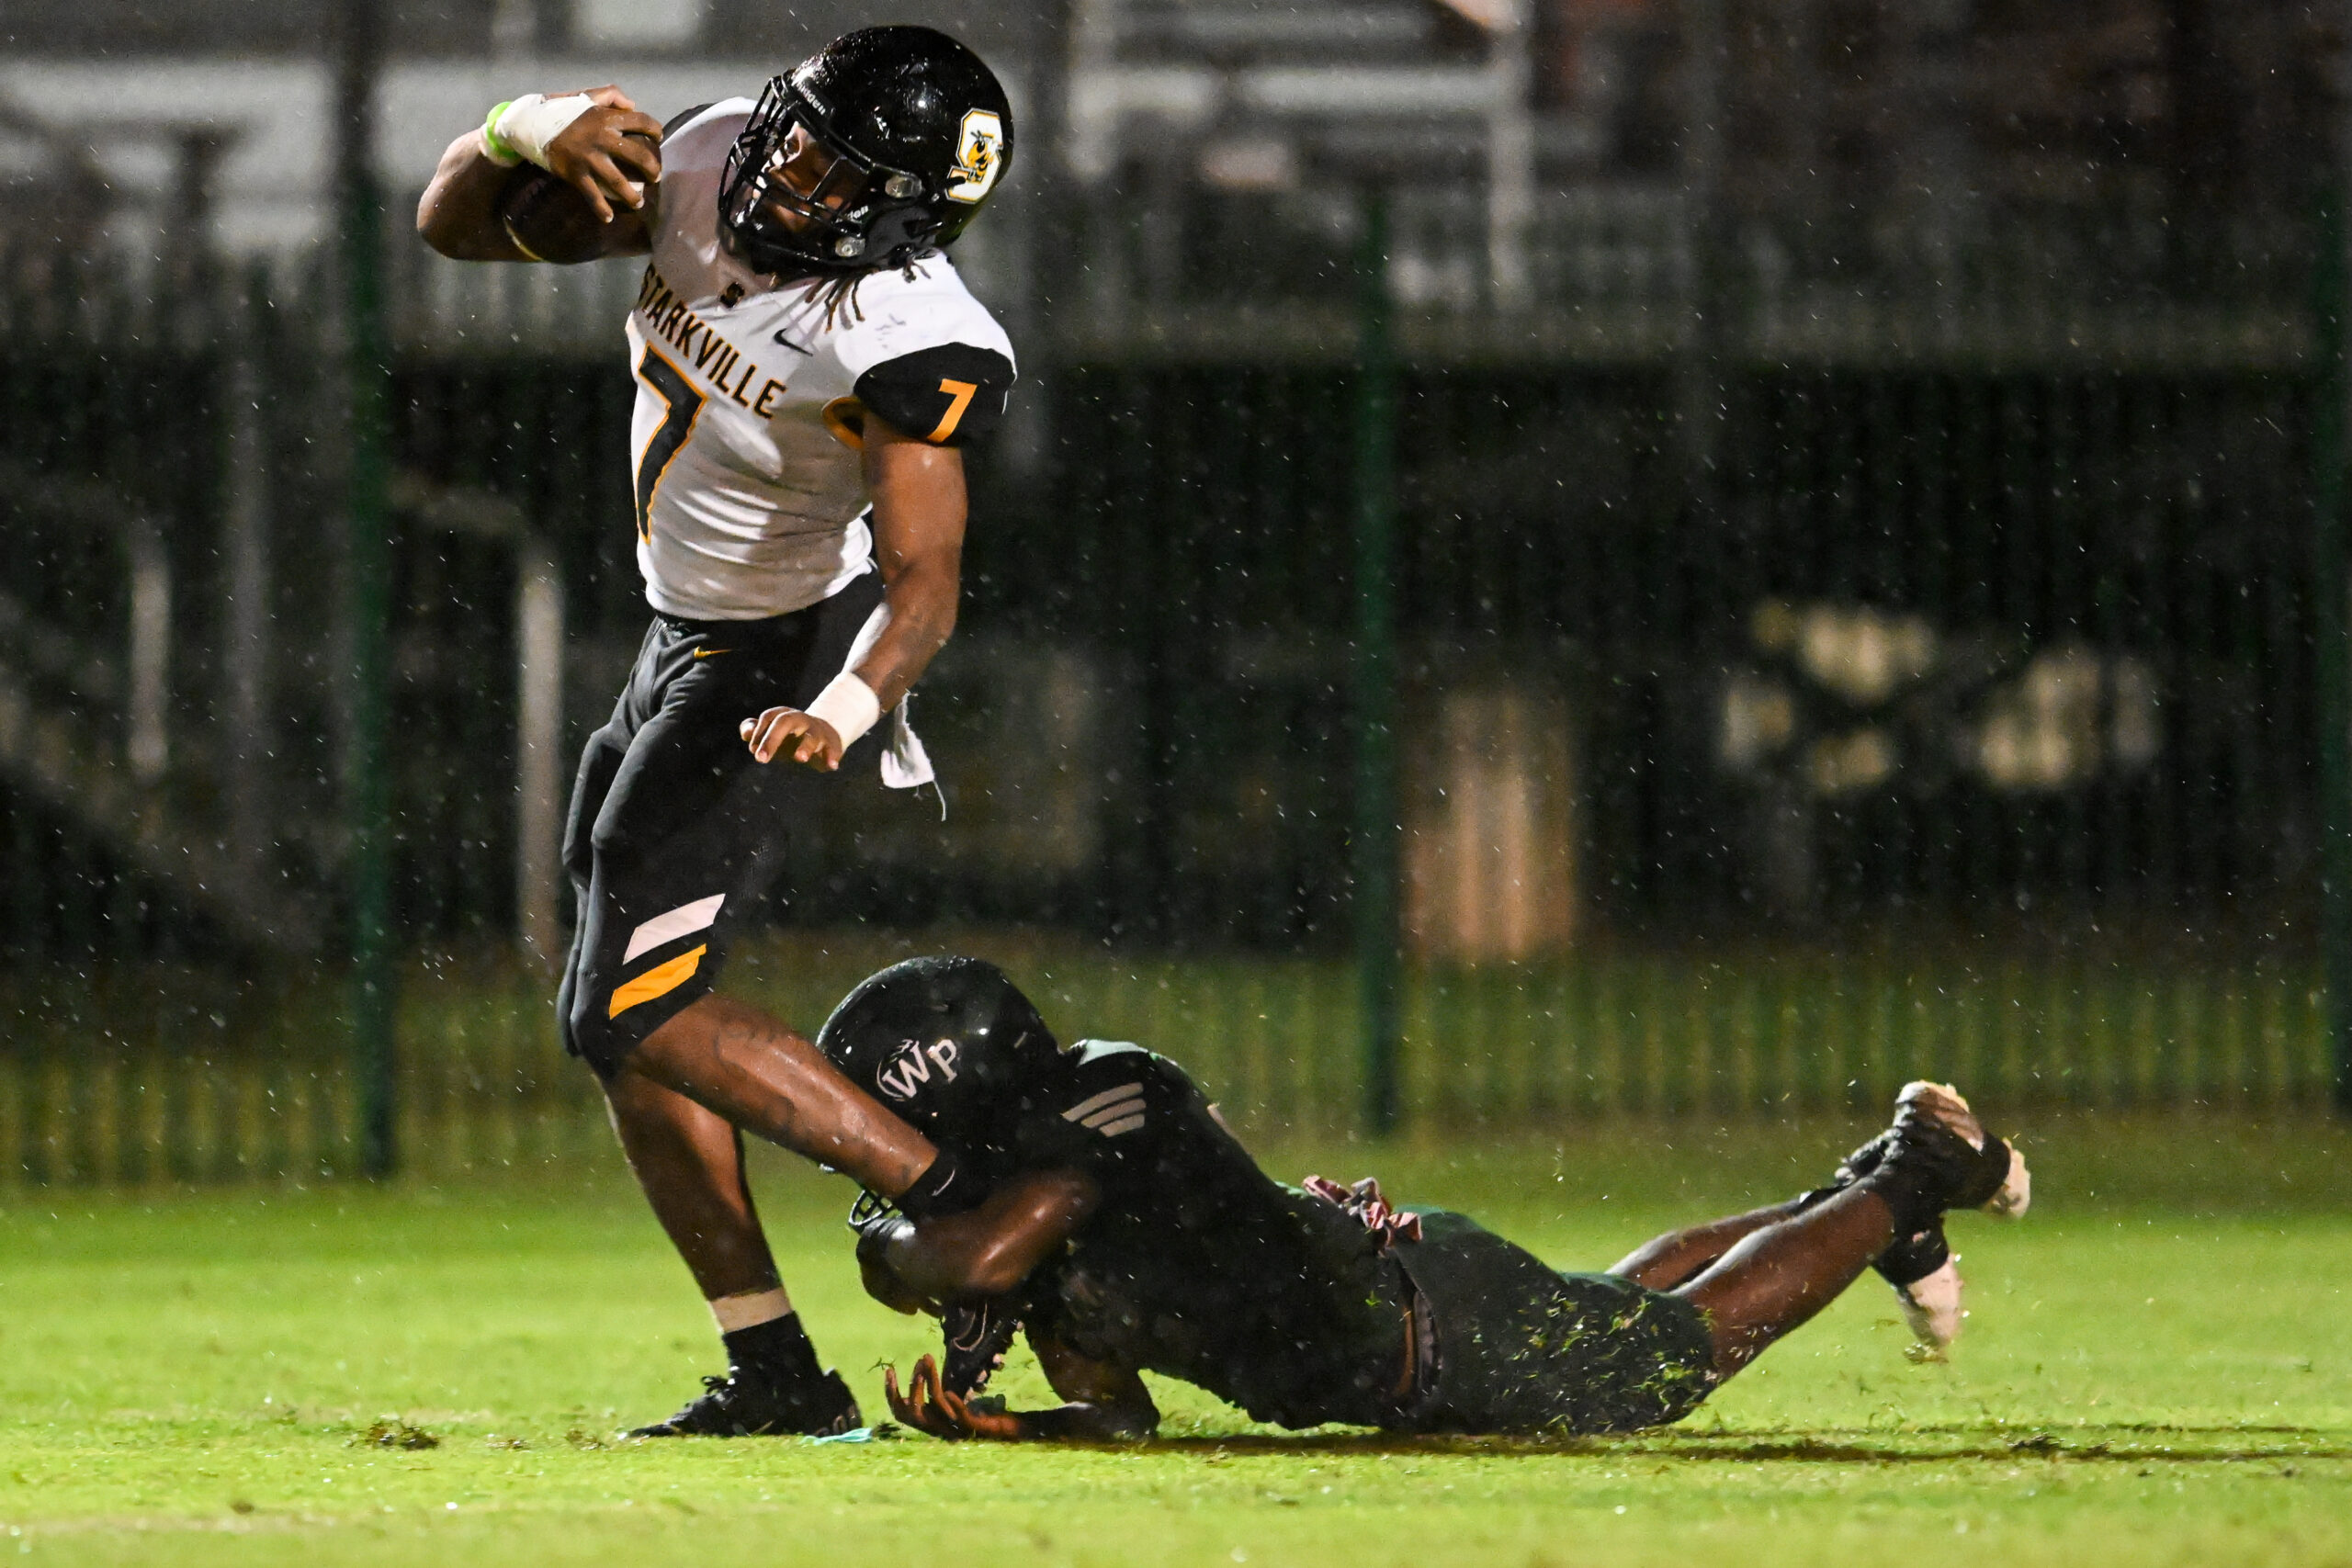 Starkville weathers the storm in highscoring win over West Point The